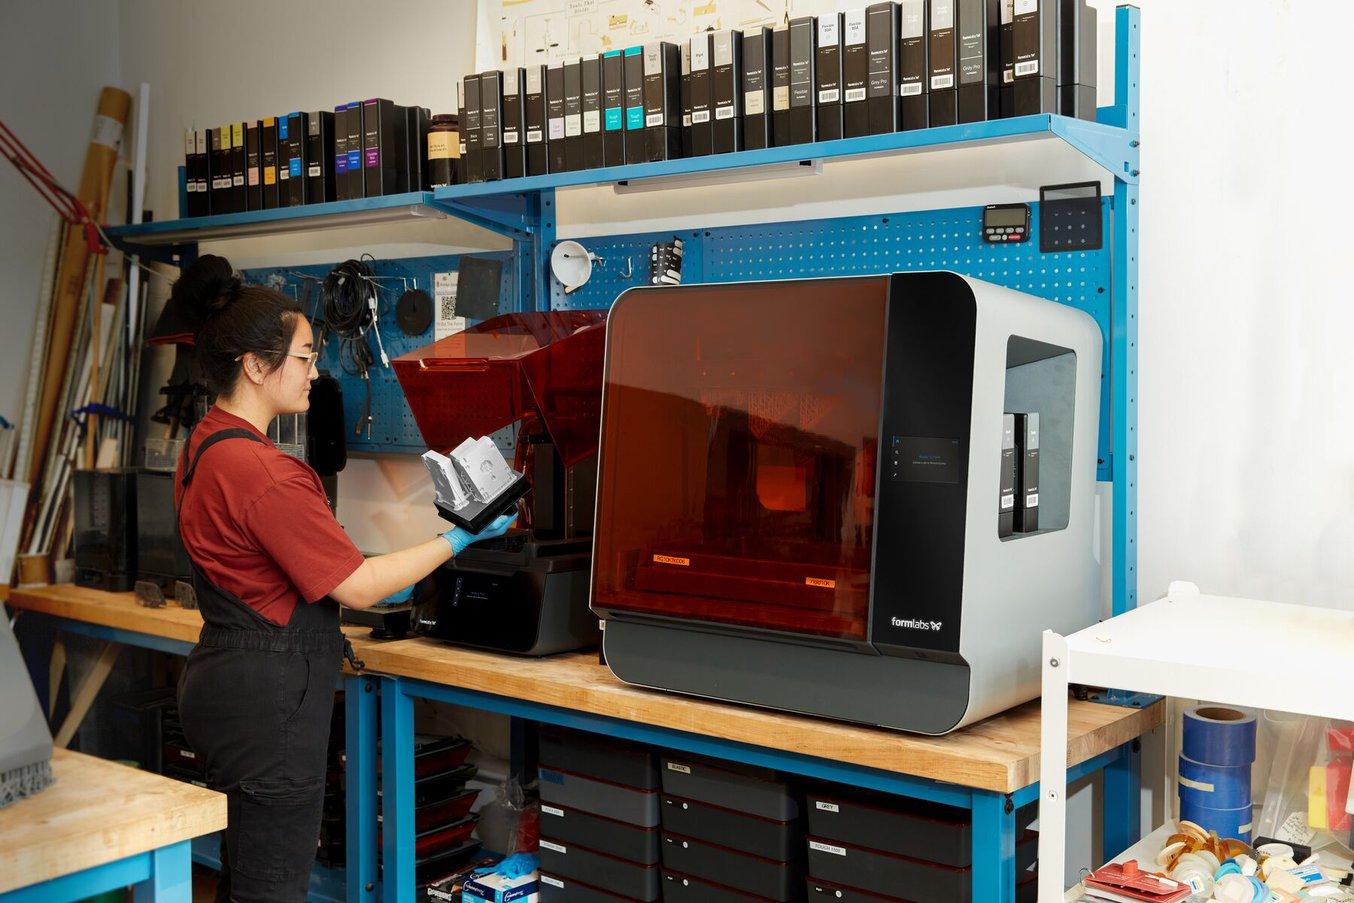 SLA 3D printers are simple to operate in house, making rapid tooling faster and more accessible.